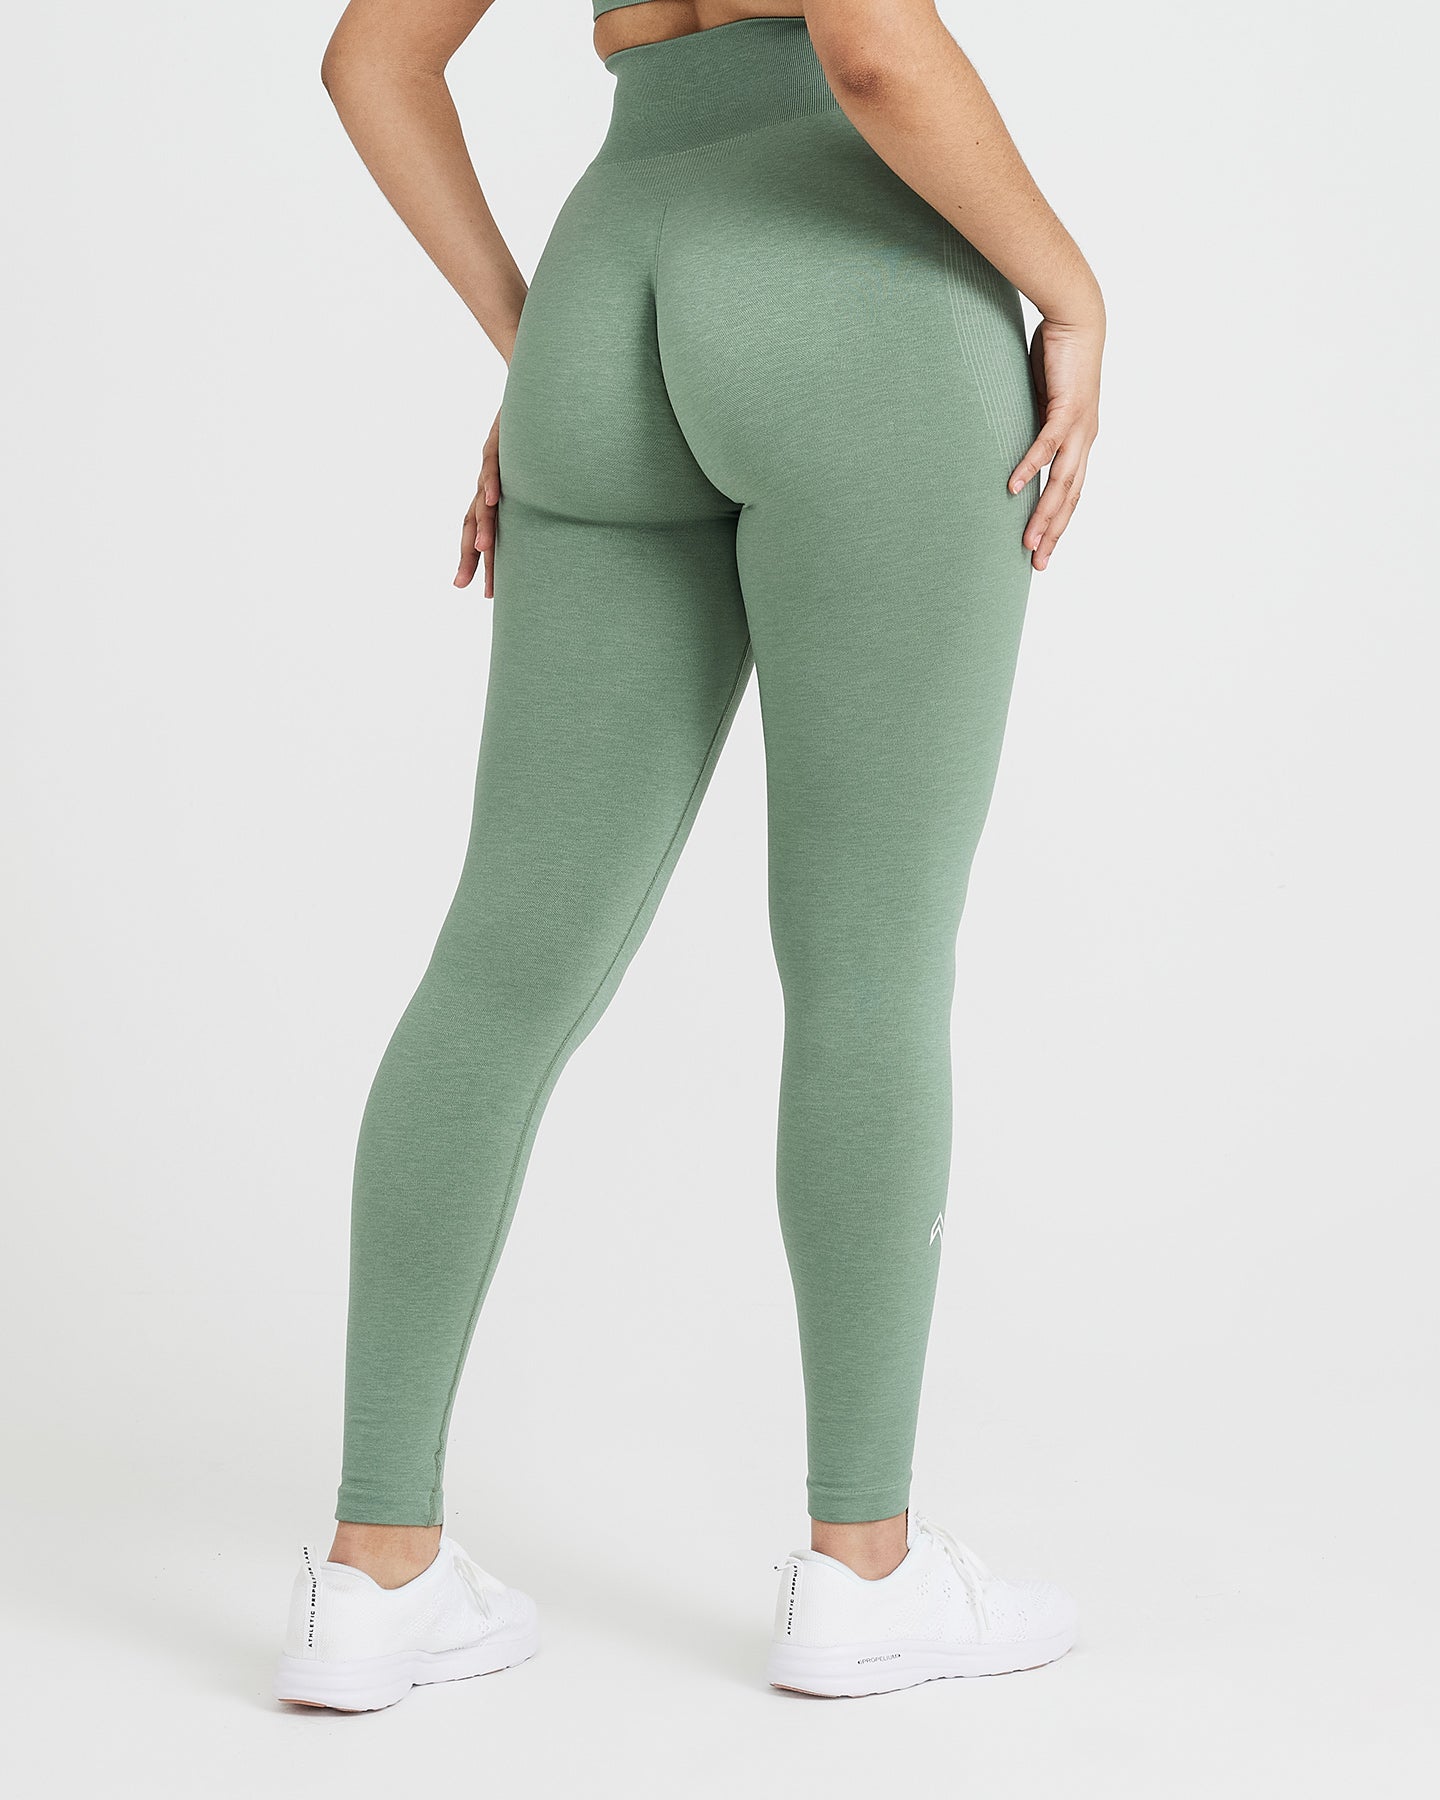 Premium Sage Green Ribbed Leggings, Unscripted